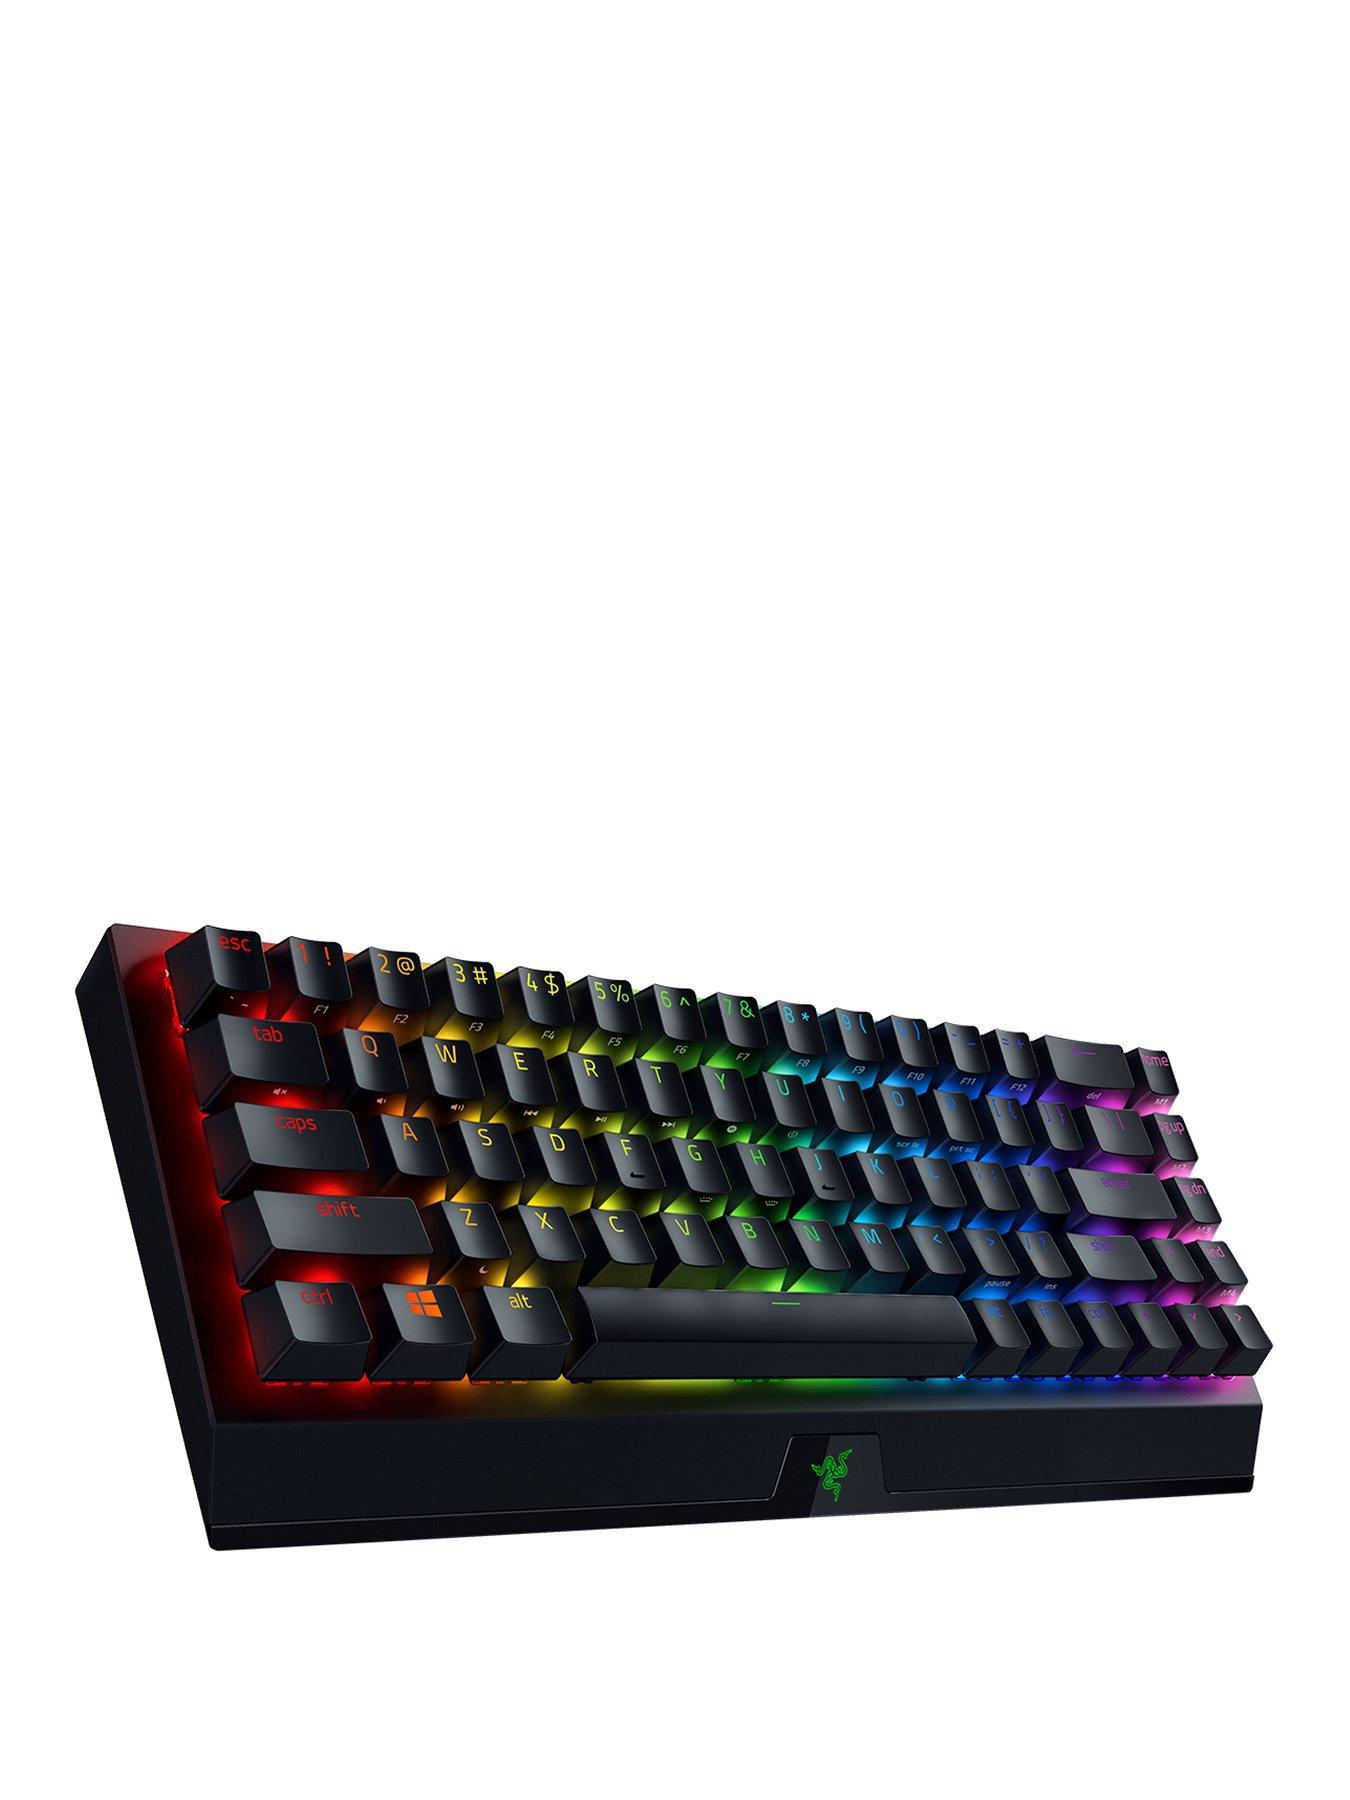 The Razer BlackWidow V3 Pro is its first wireless gaming keyboard. Anyone  else surprised by that?